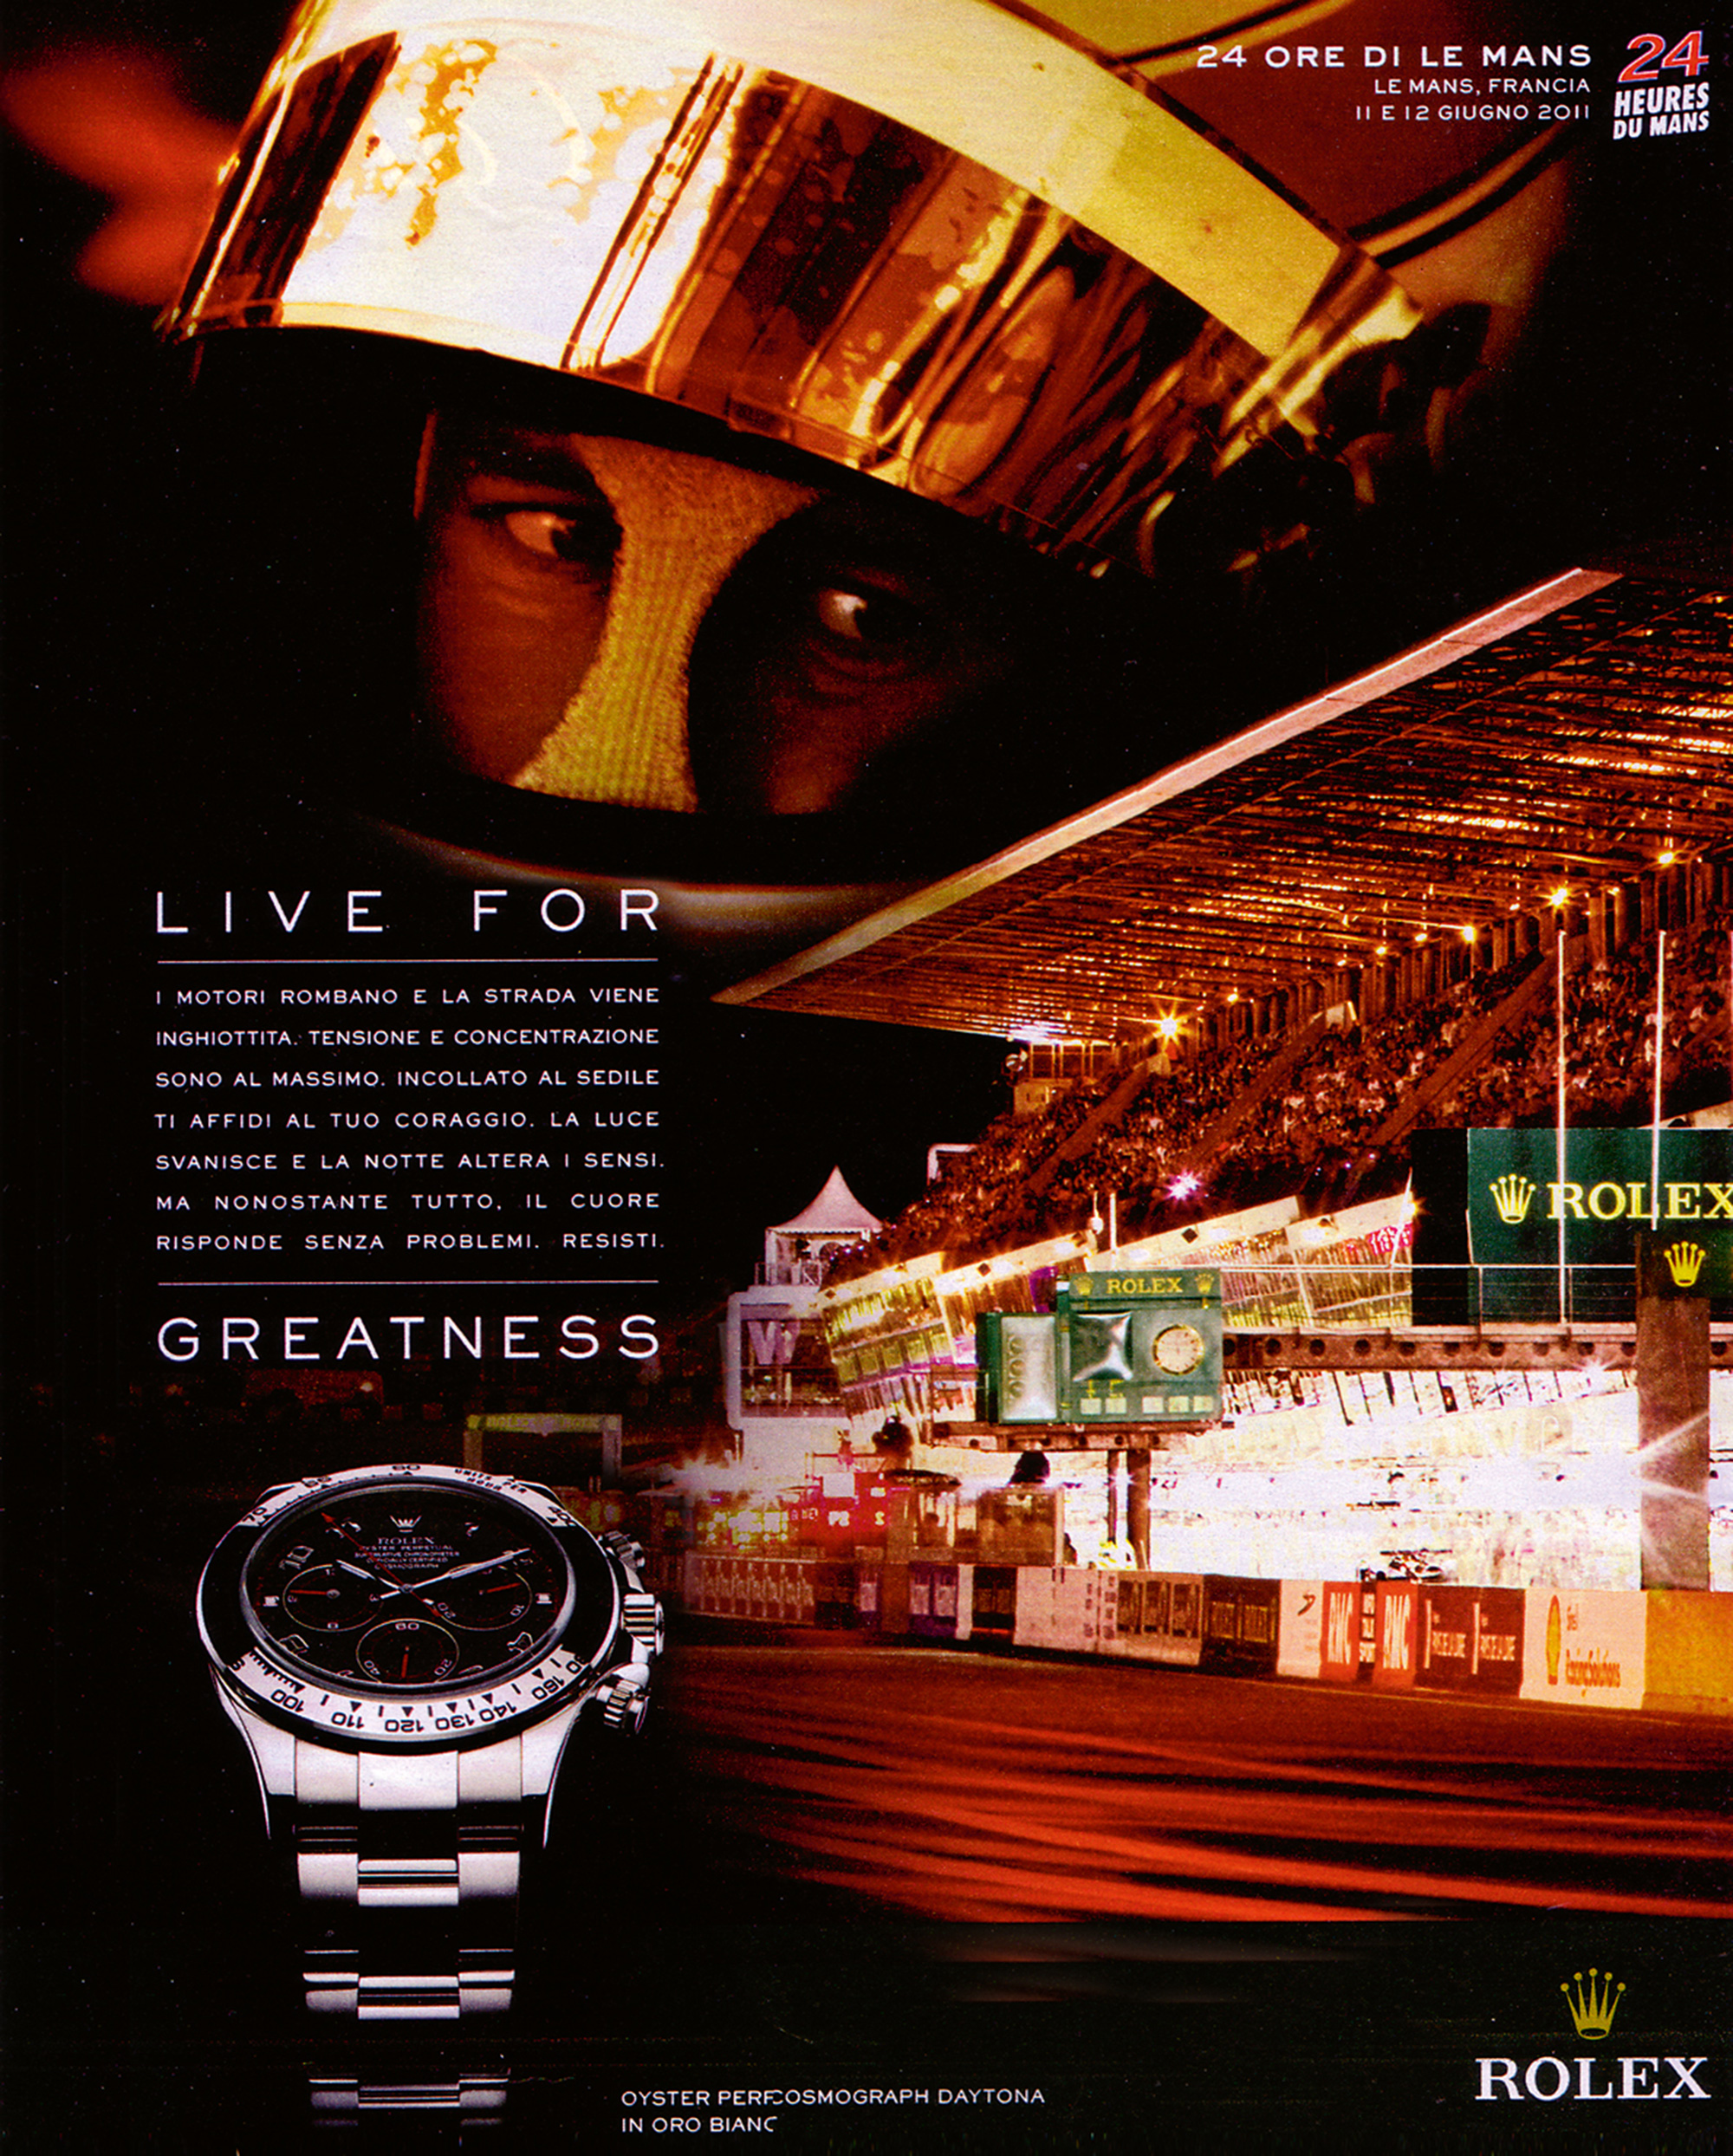 An Italian Rolex advertisement juxtaposing the watch and the 24 Hours of Le Mans race. 